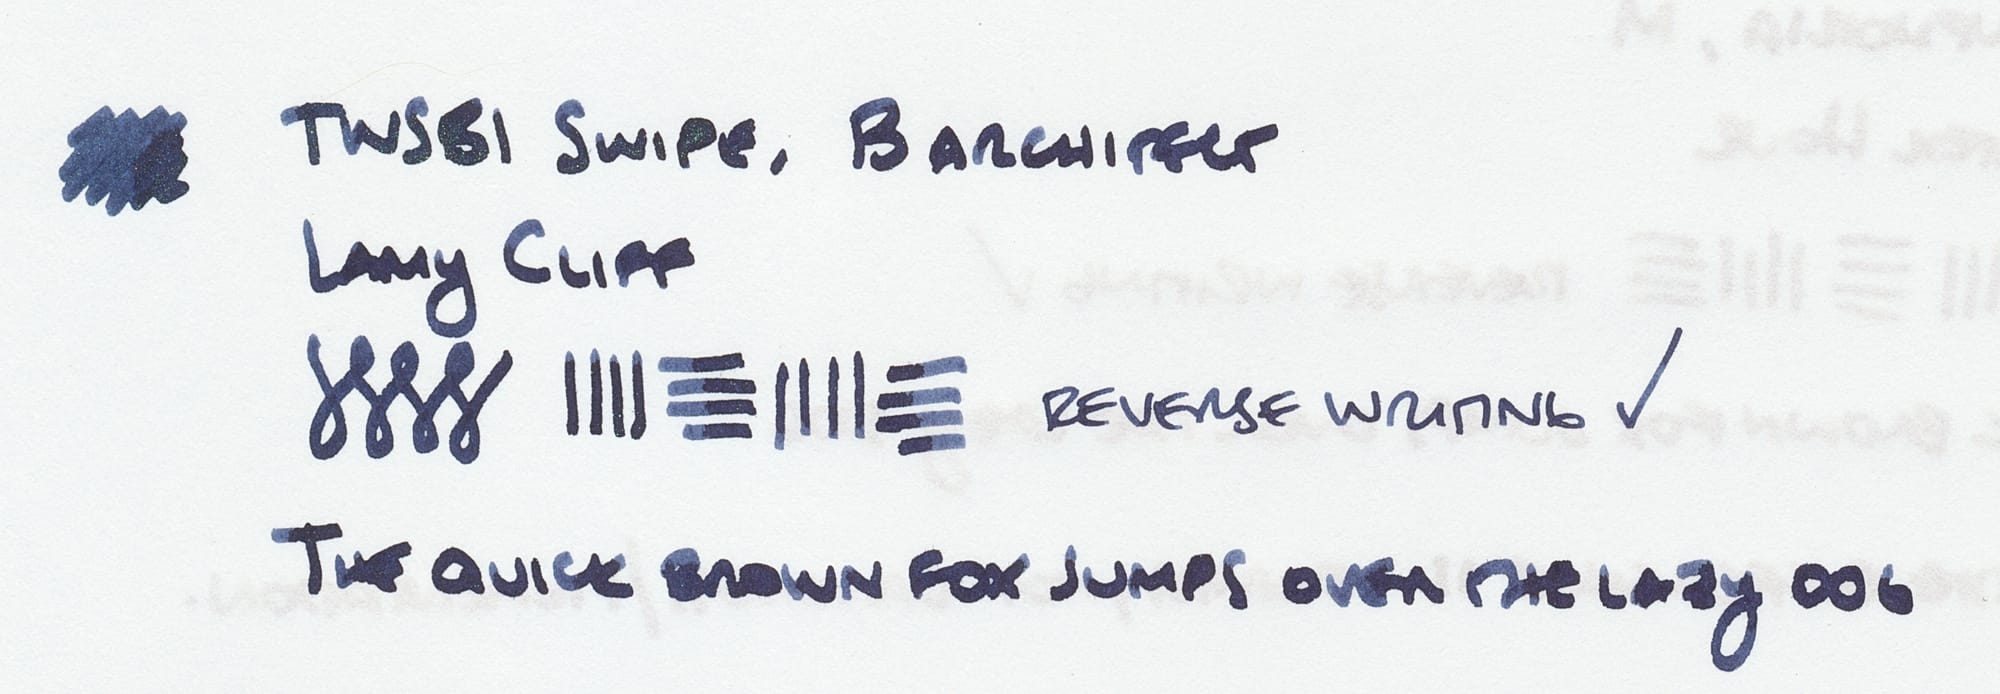 Writing sample using a TWSBI Swipe fountain pen with a B architect nib, listing the pen name, ink name, some figure-8s, horizontal and vertical lines, demonstration of reverse writing, and "The quick brown fox jumps over the lazy dog"